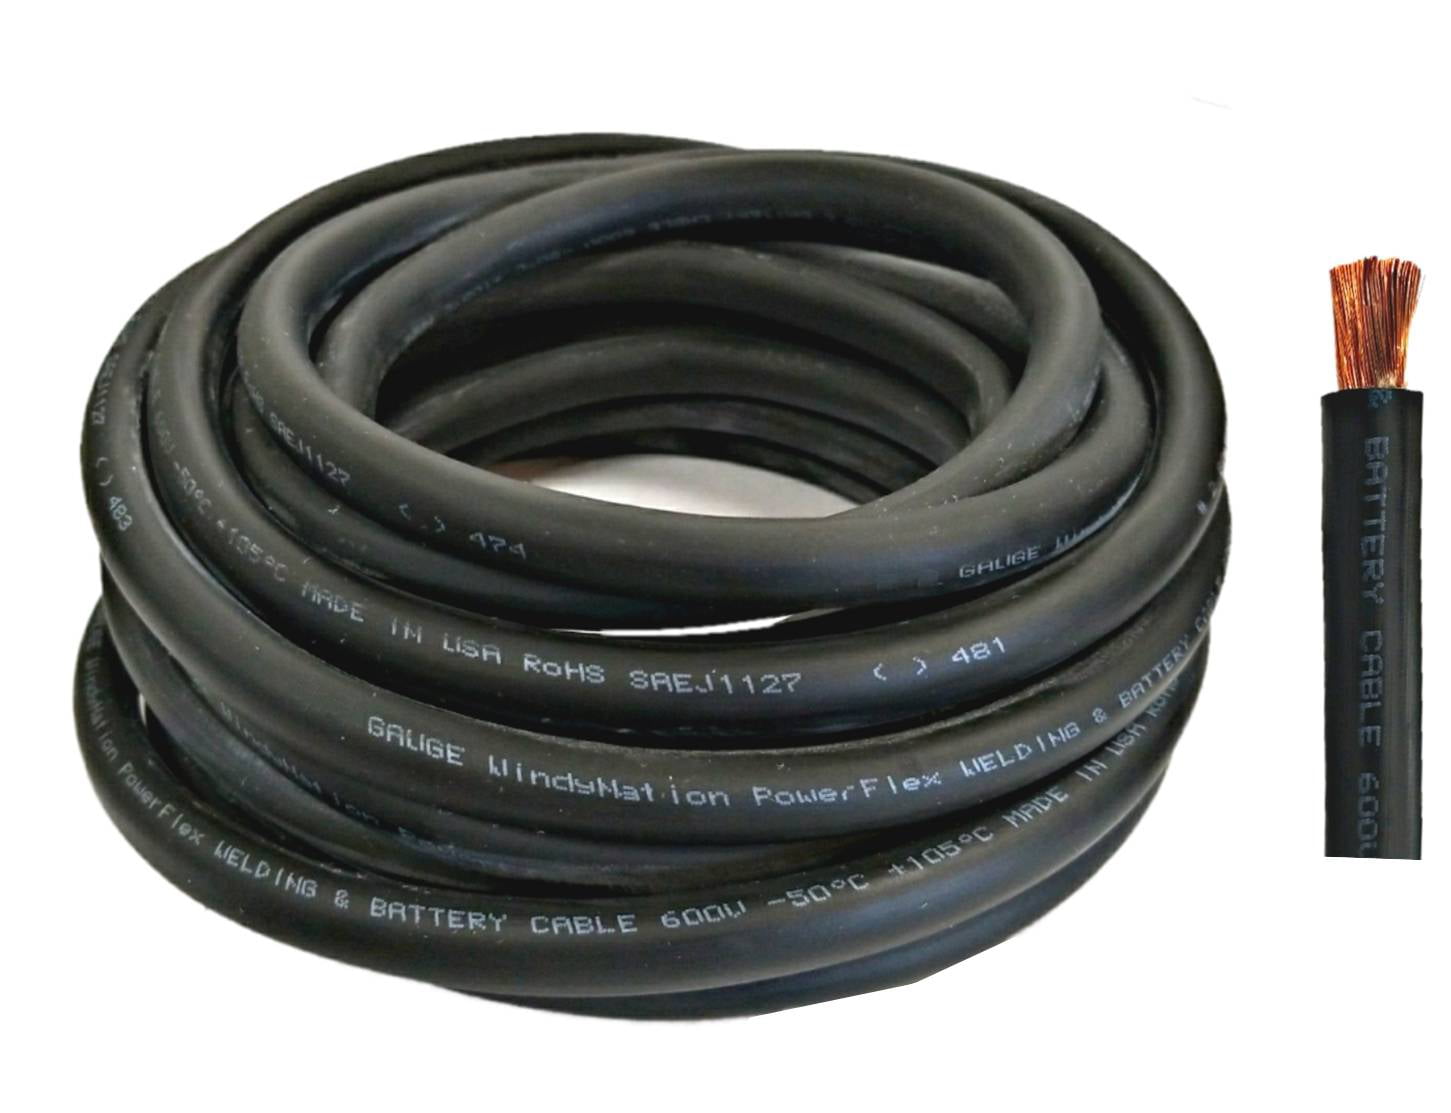 Spartan Power 2/0 AWG 5 Foot Black Welding Lead & Battery Cable Copper Wire by Royal Excelene